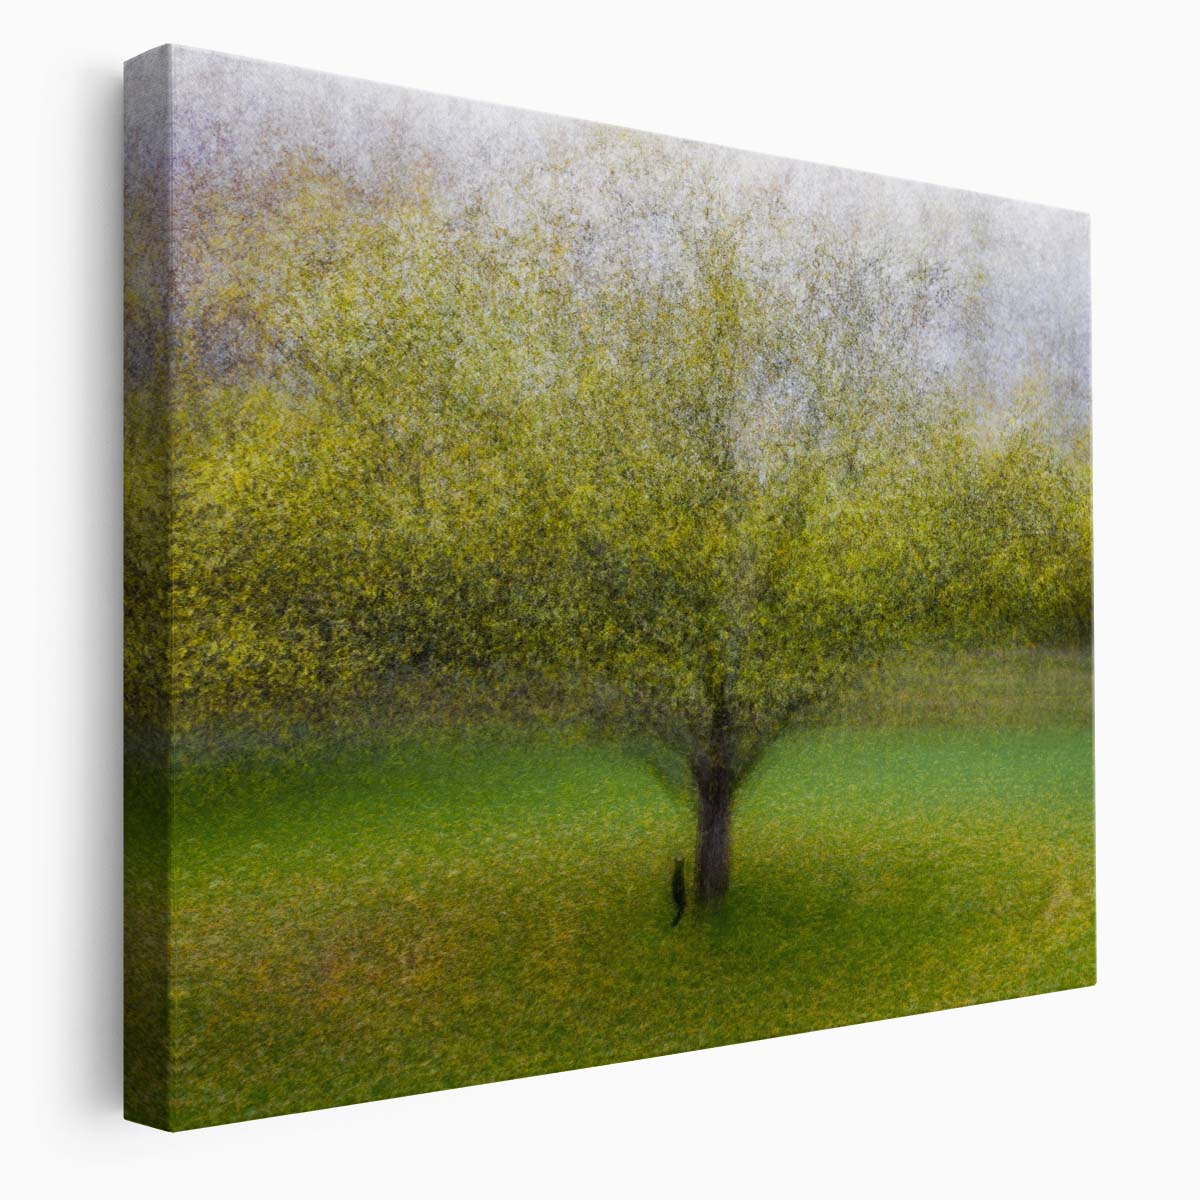 Impressionistic Cat Among Green Leaves Wall Art by Luxuriance Designs. Made in USA.